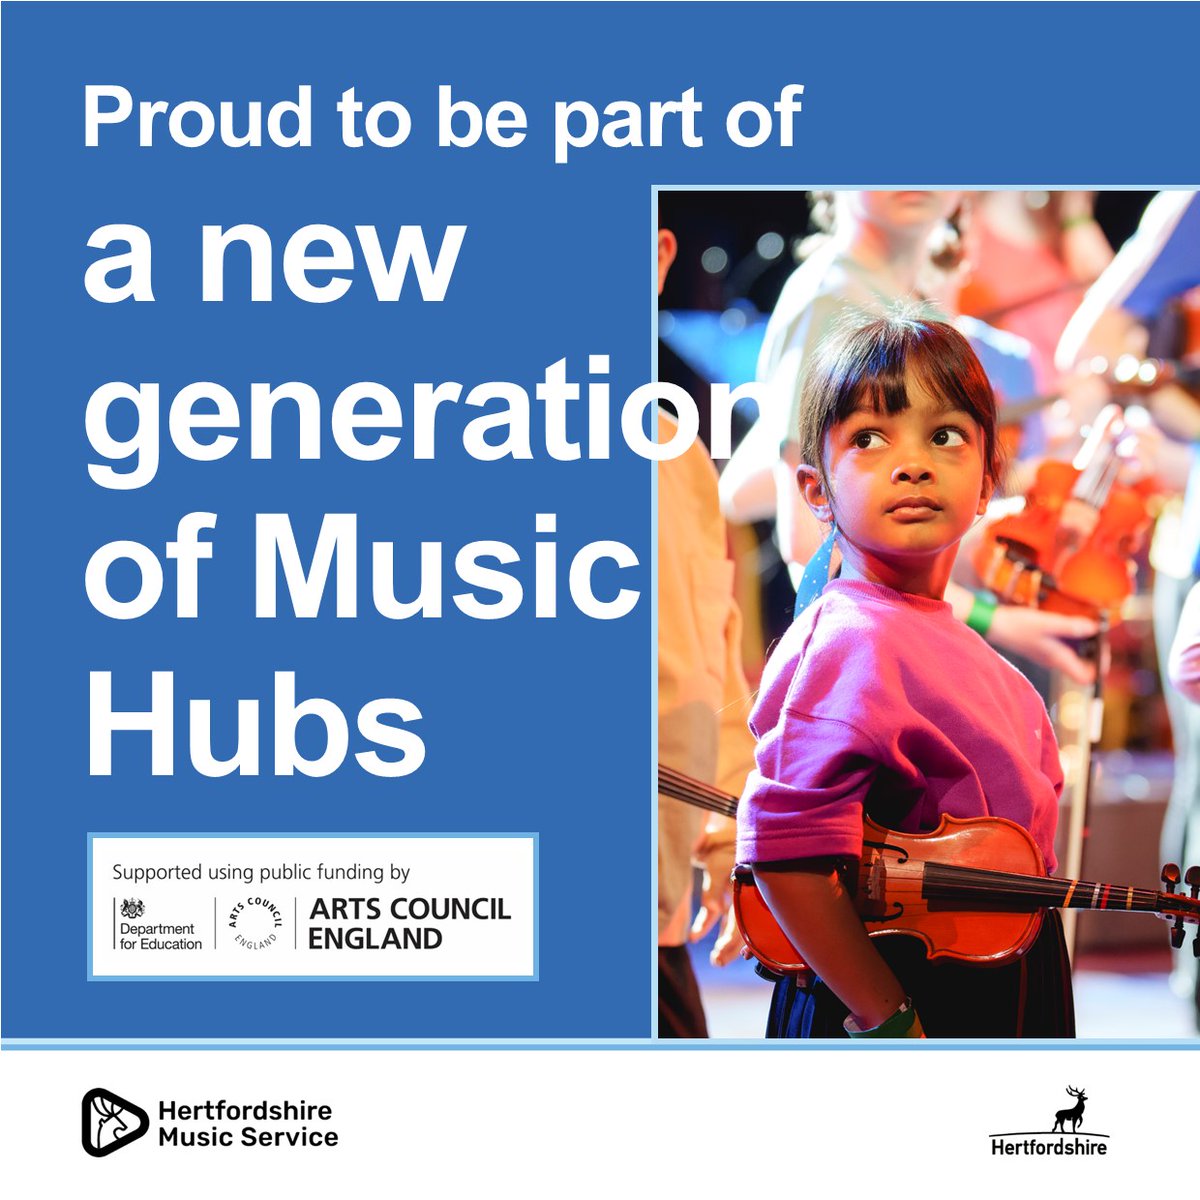 Exciting news! We're part of a new generation of Music Hubs, providing children and young people across Hertfordshire with the opportunity to learn and create music. @hertscc @ace_national @ace_southeast #MusicHubs #ACEsupported